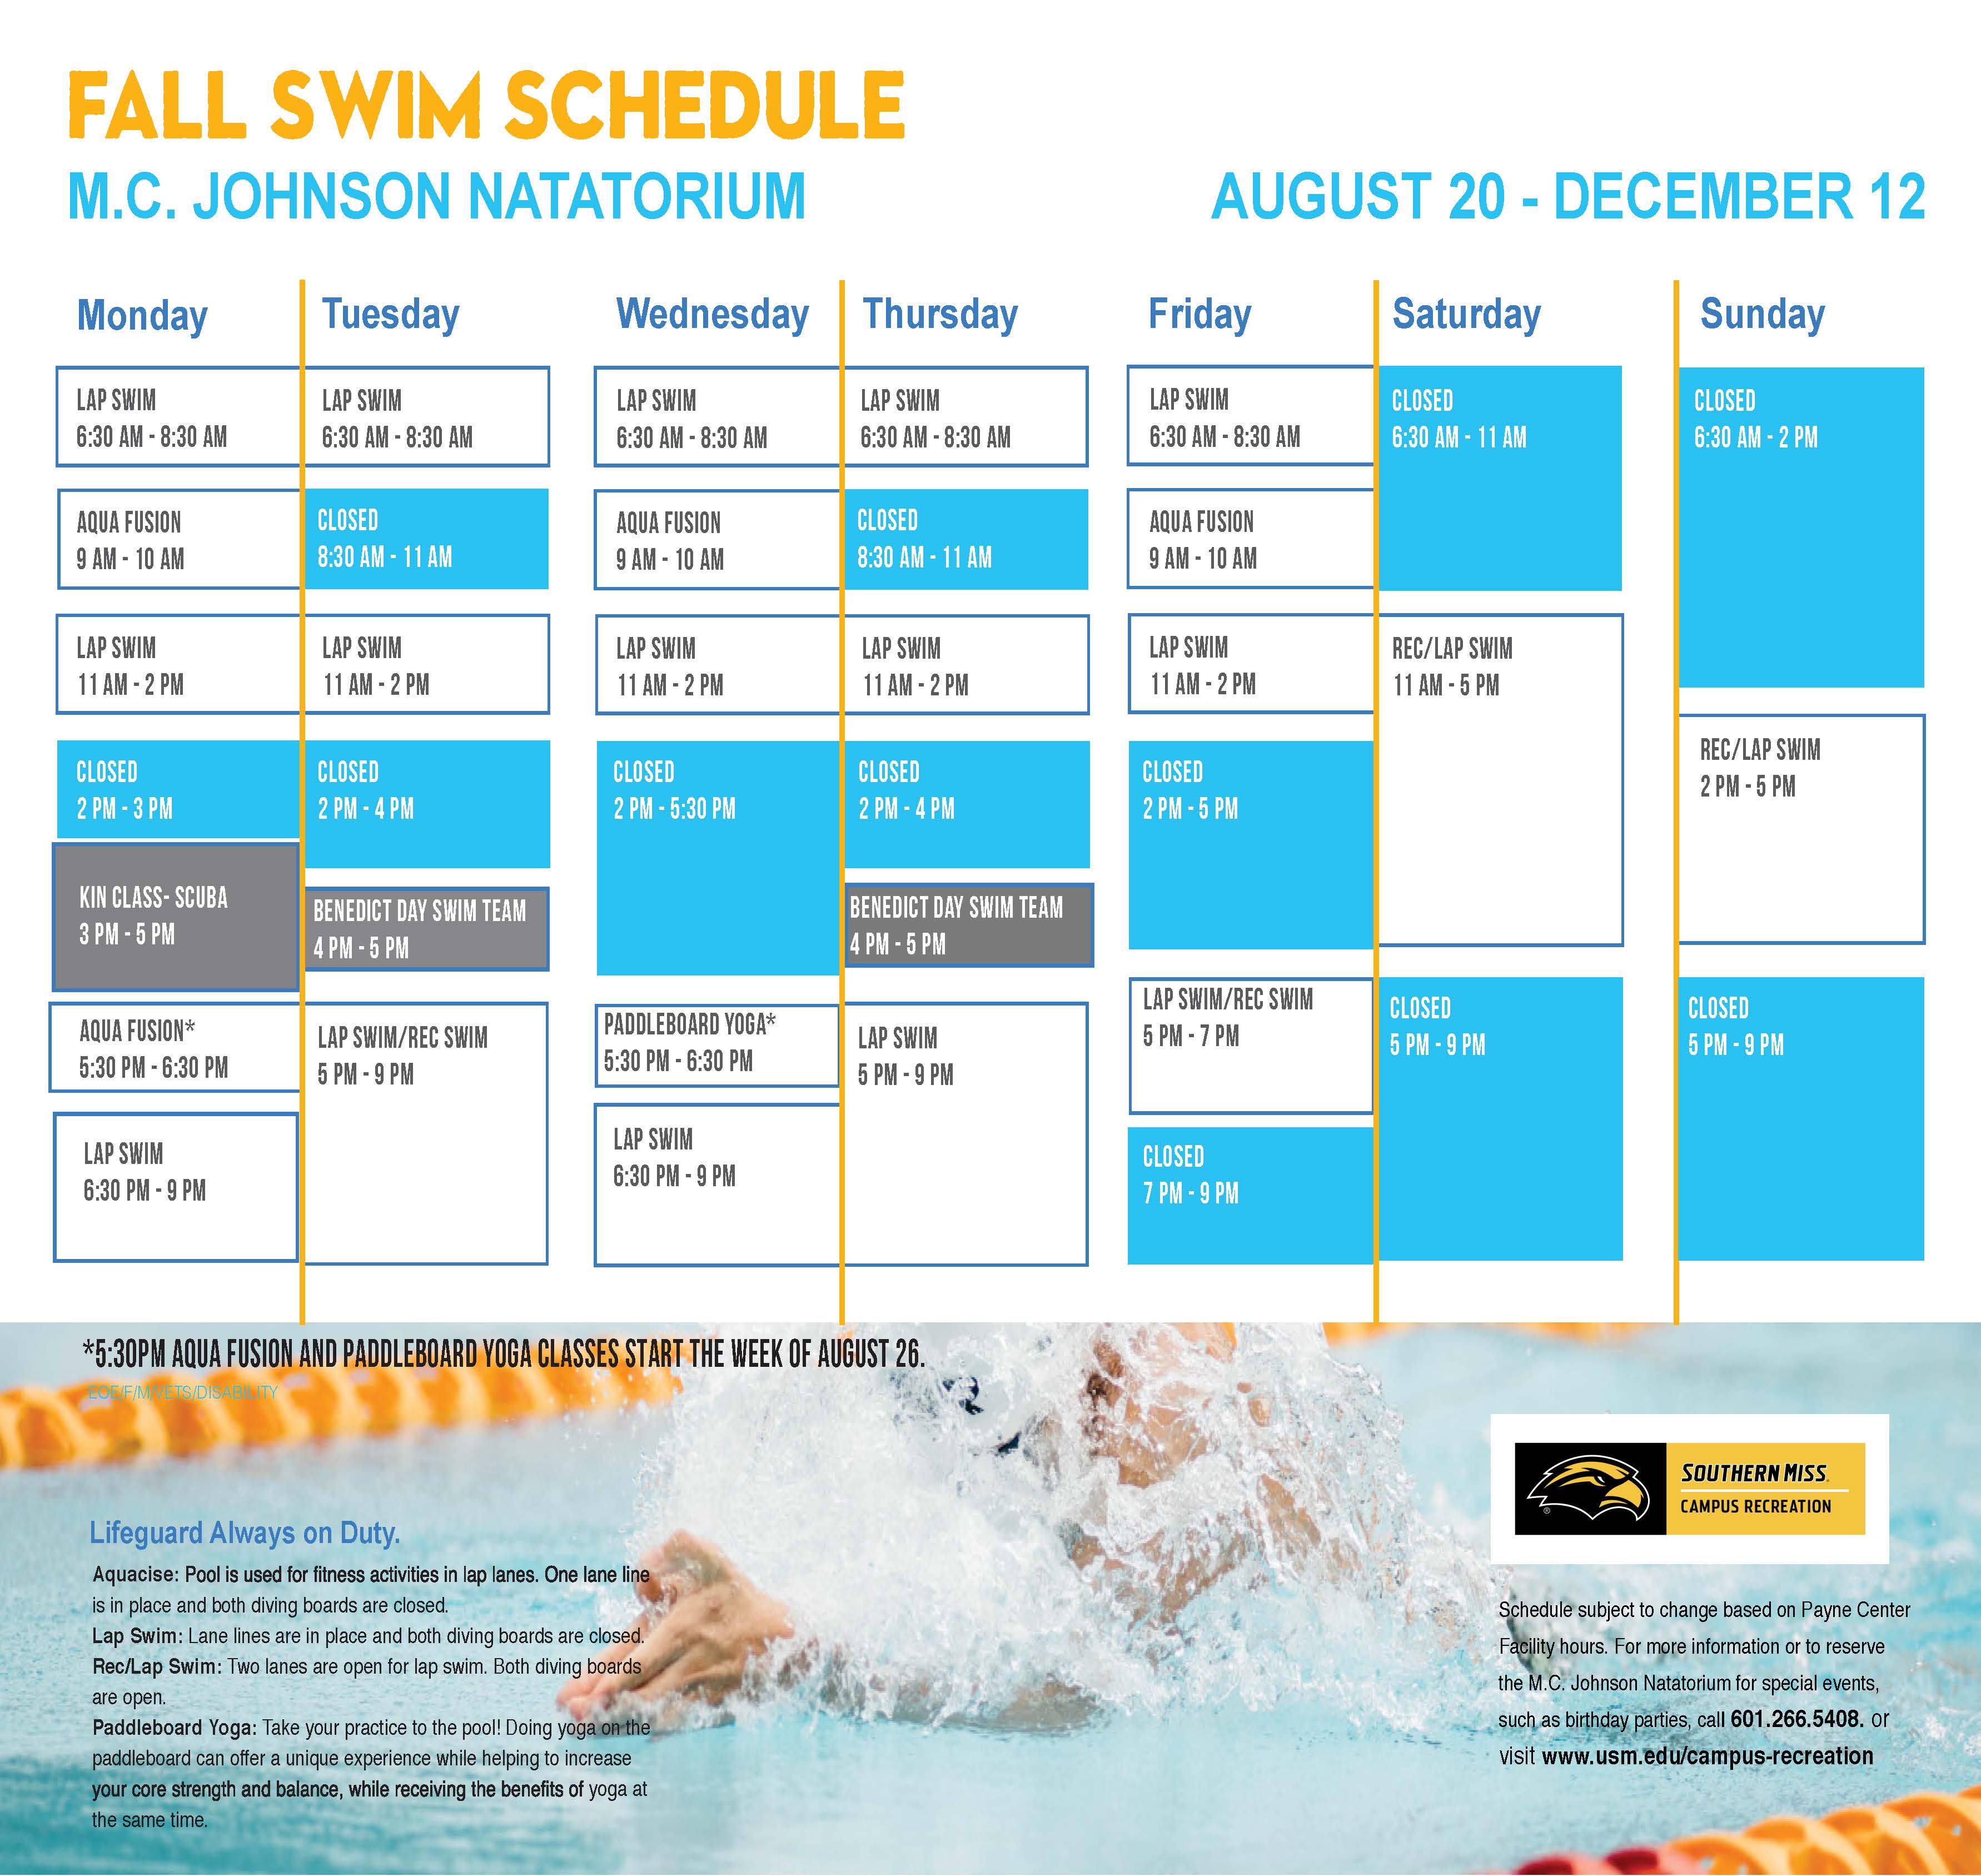 Schedules | Campus Recreation | The University of Southern Mississippi